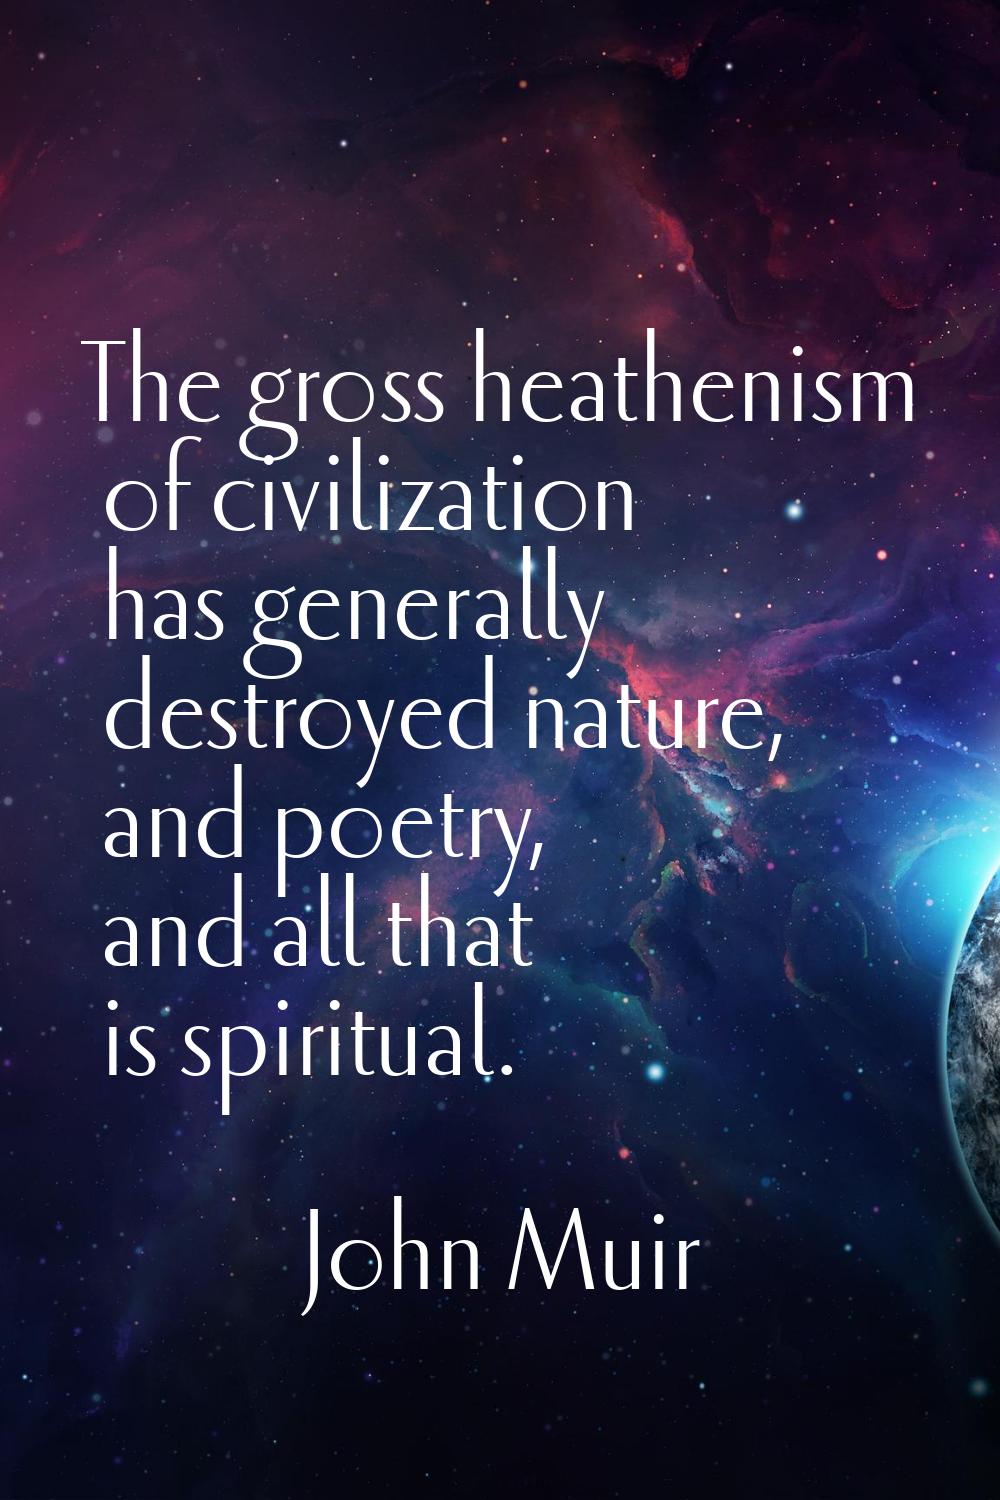 The gross heathenism of civilization has generally destroyed nature, and poetry, and all that is sp